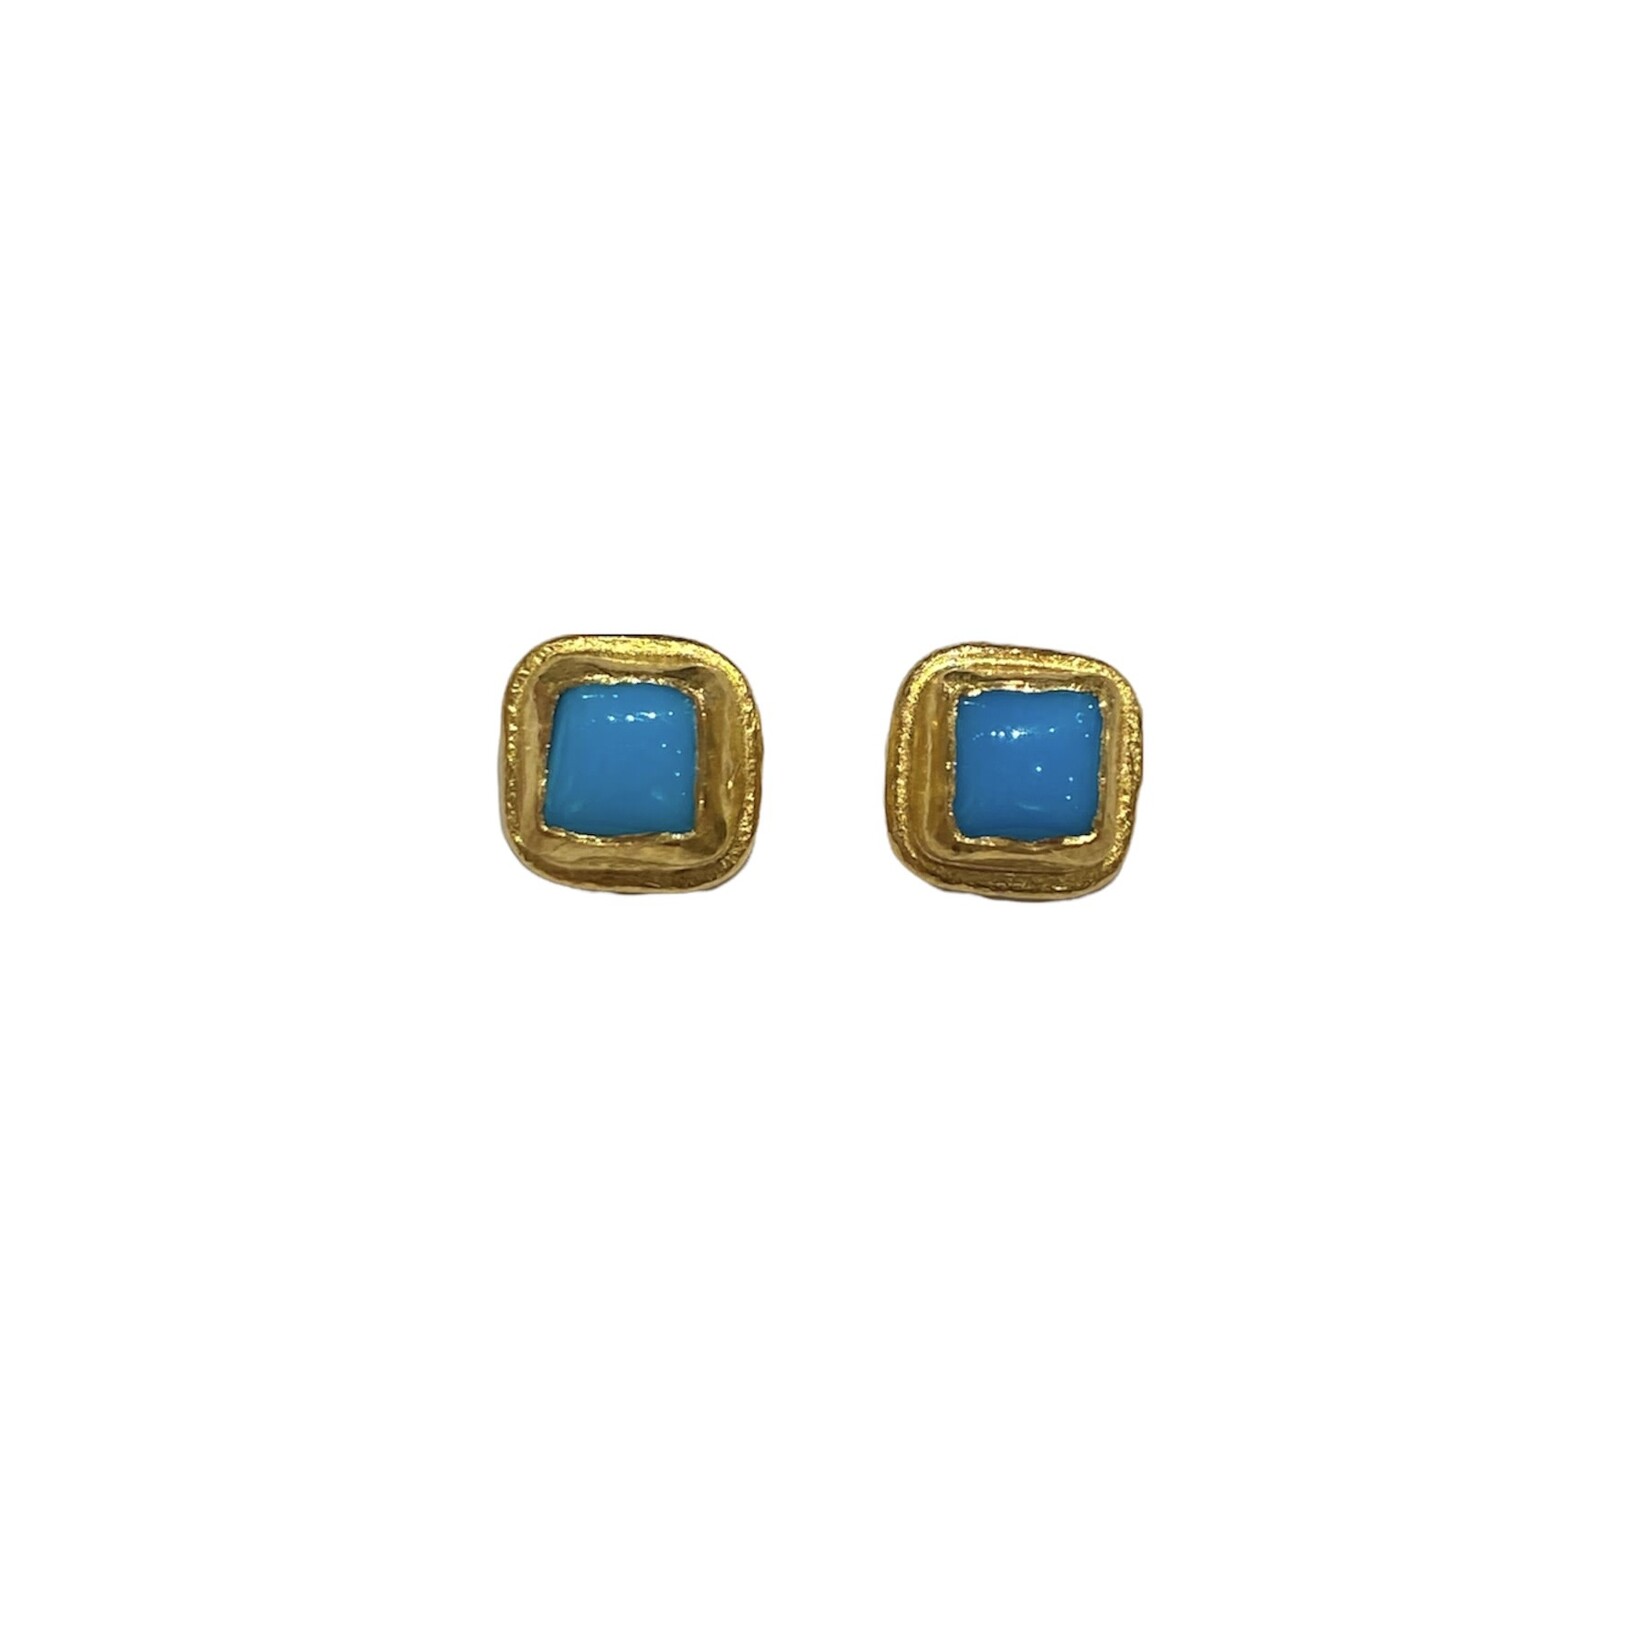 ARA Collection 24k Gold and Turquoise Post Earrings